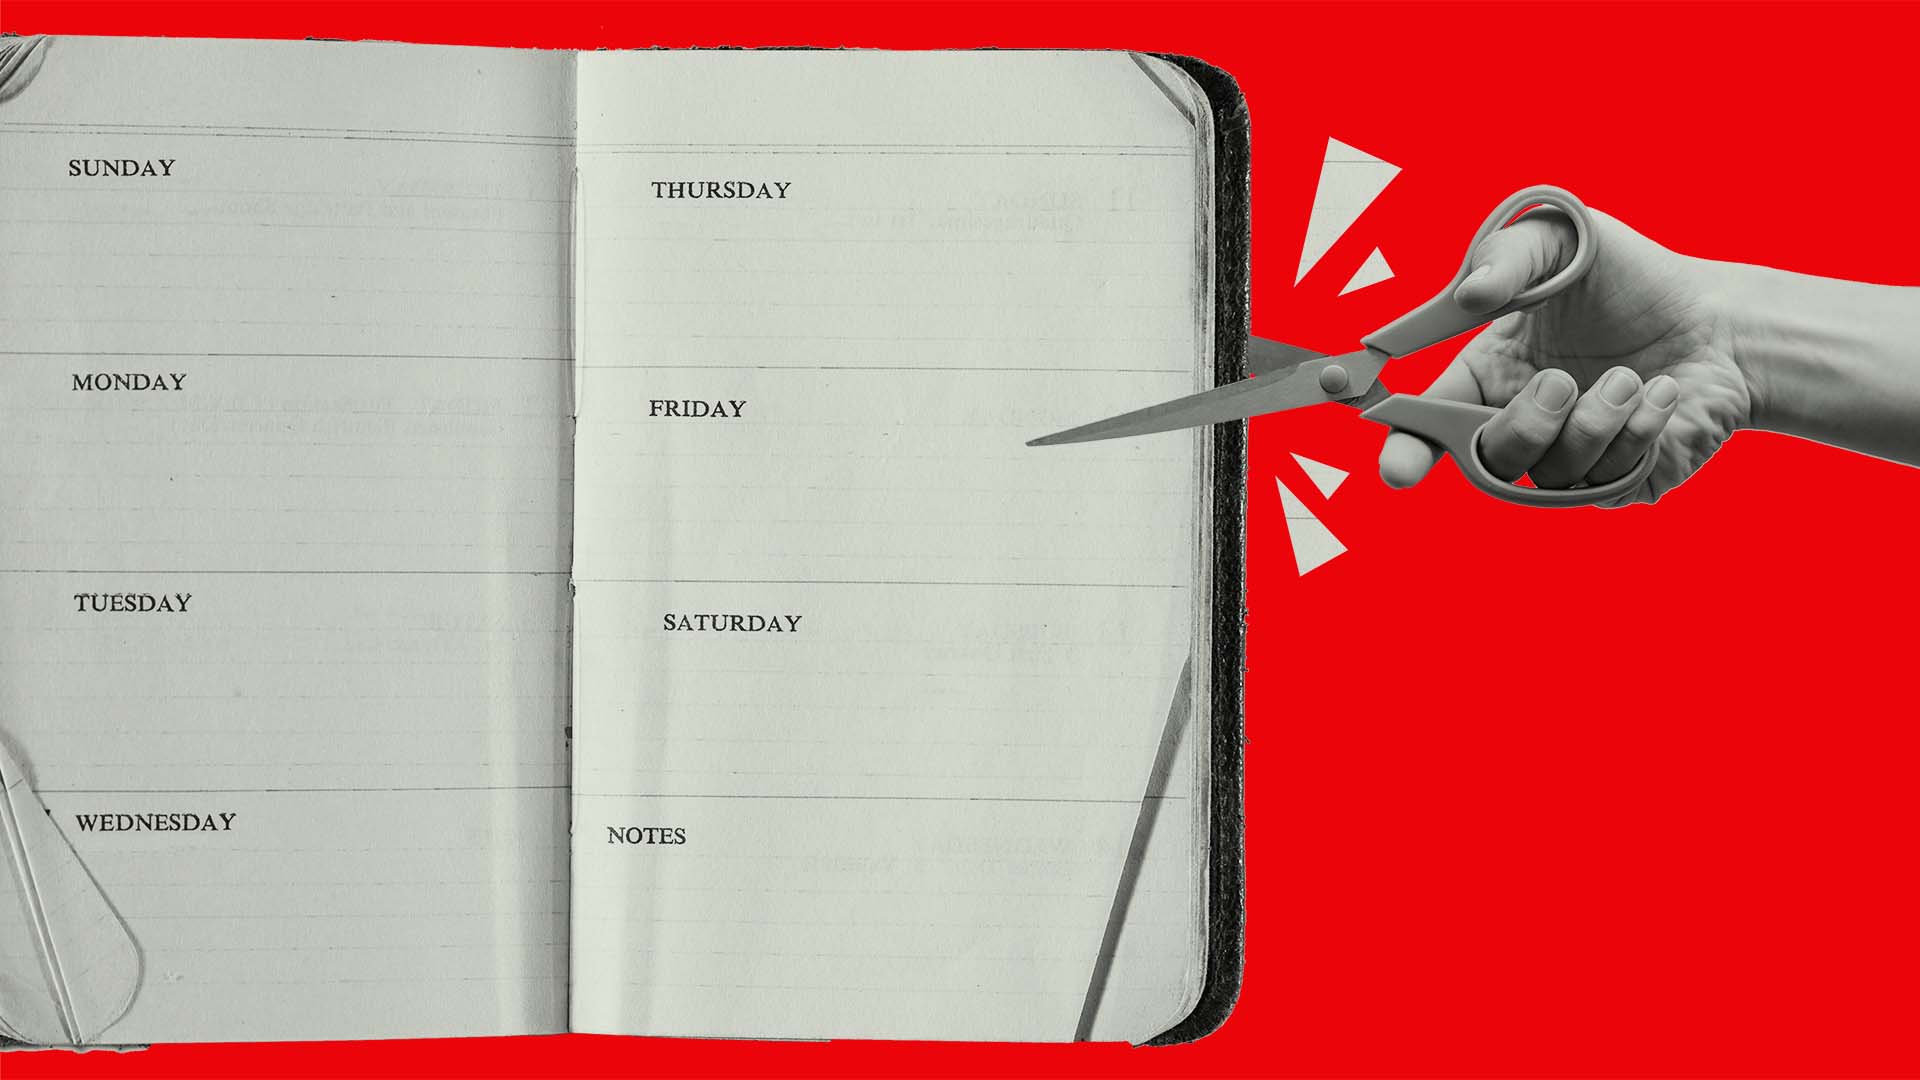 How Does It Feel to Switch to a 4-Day Workweek? 15 Workers Who Have Done It Weigh In